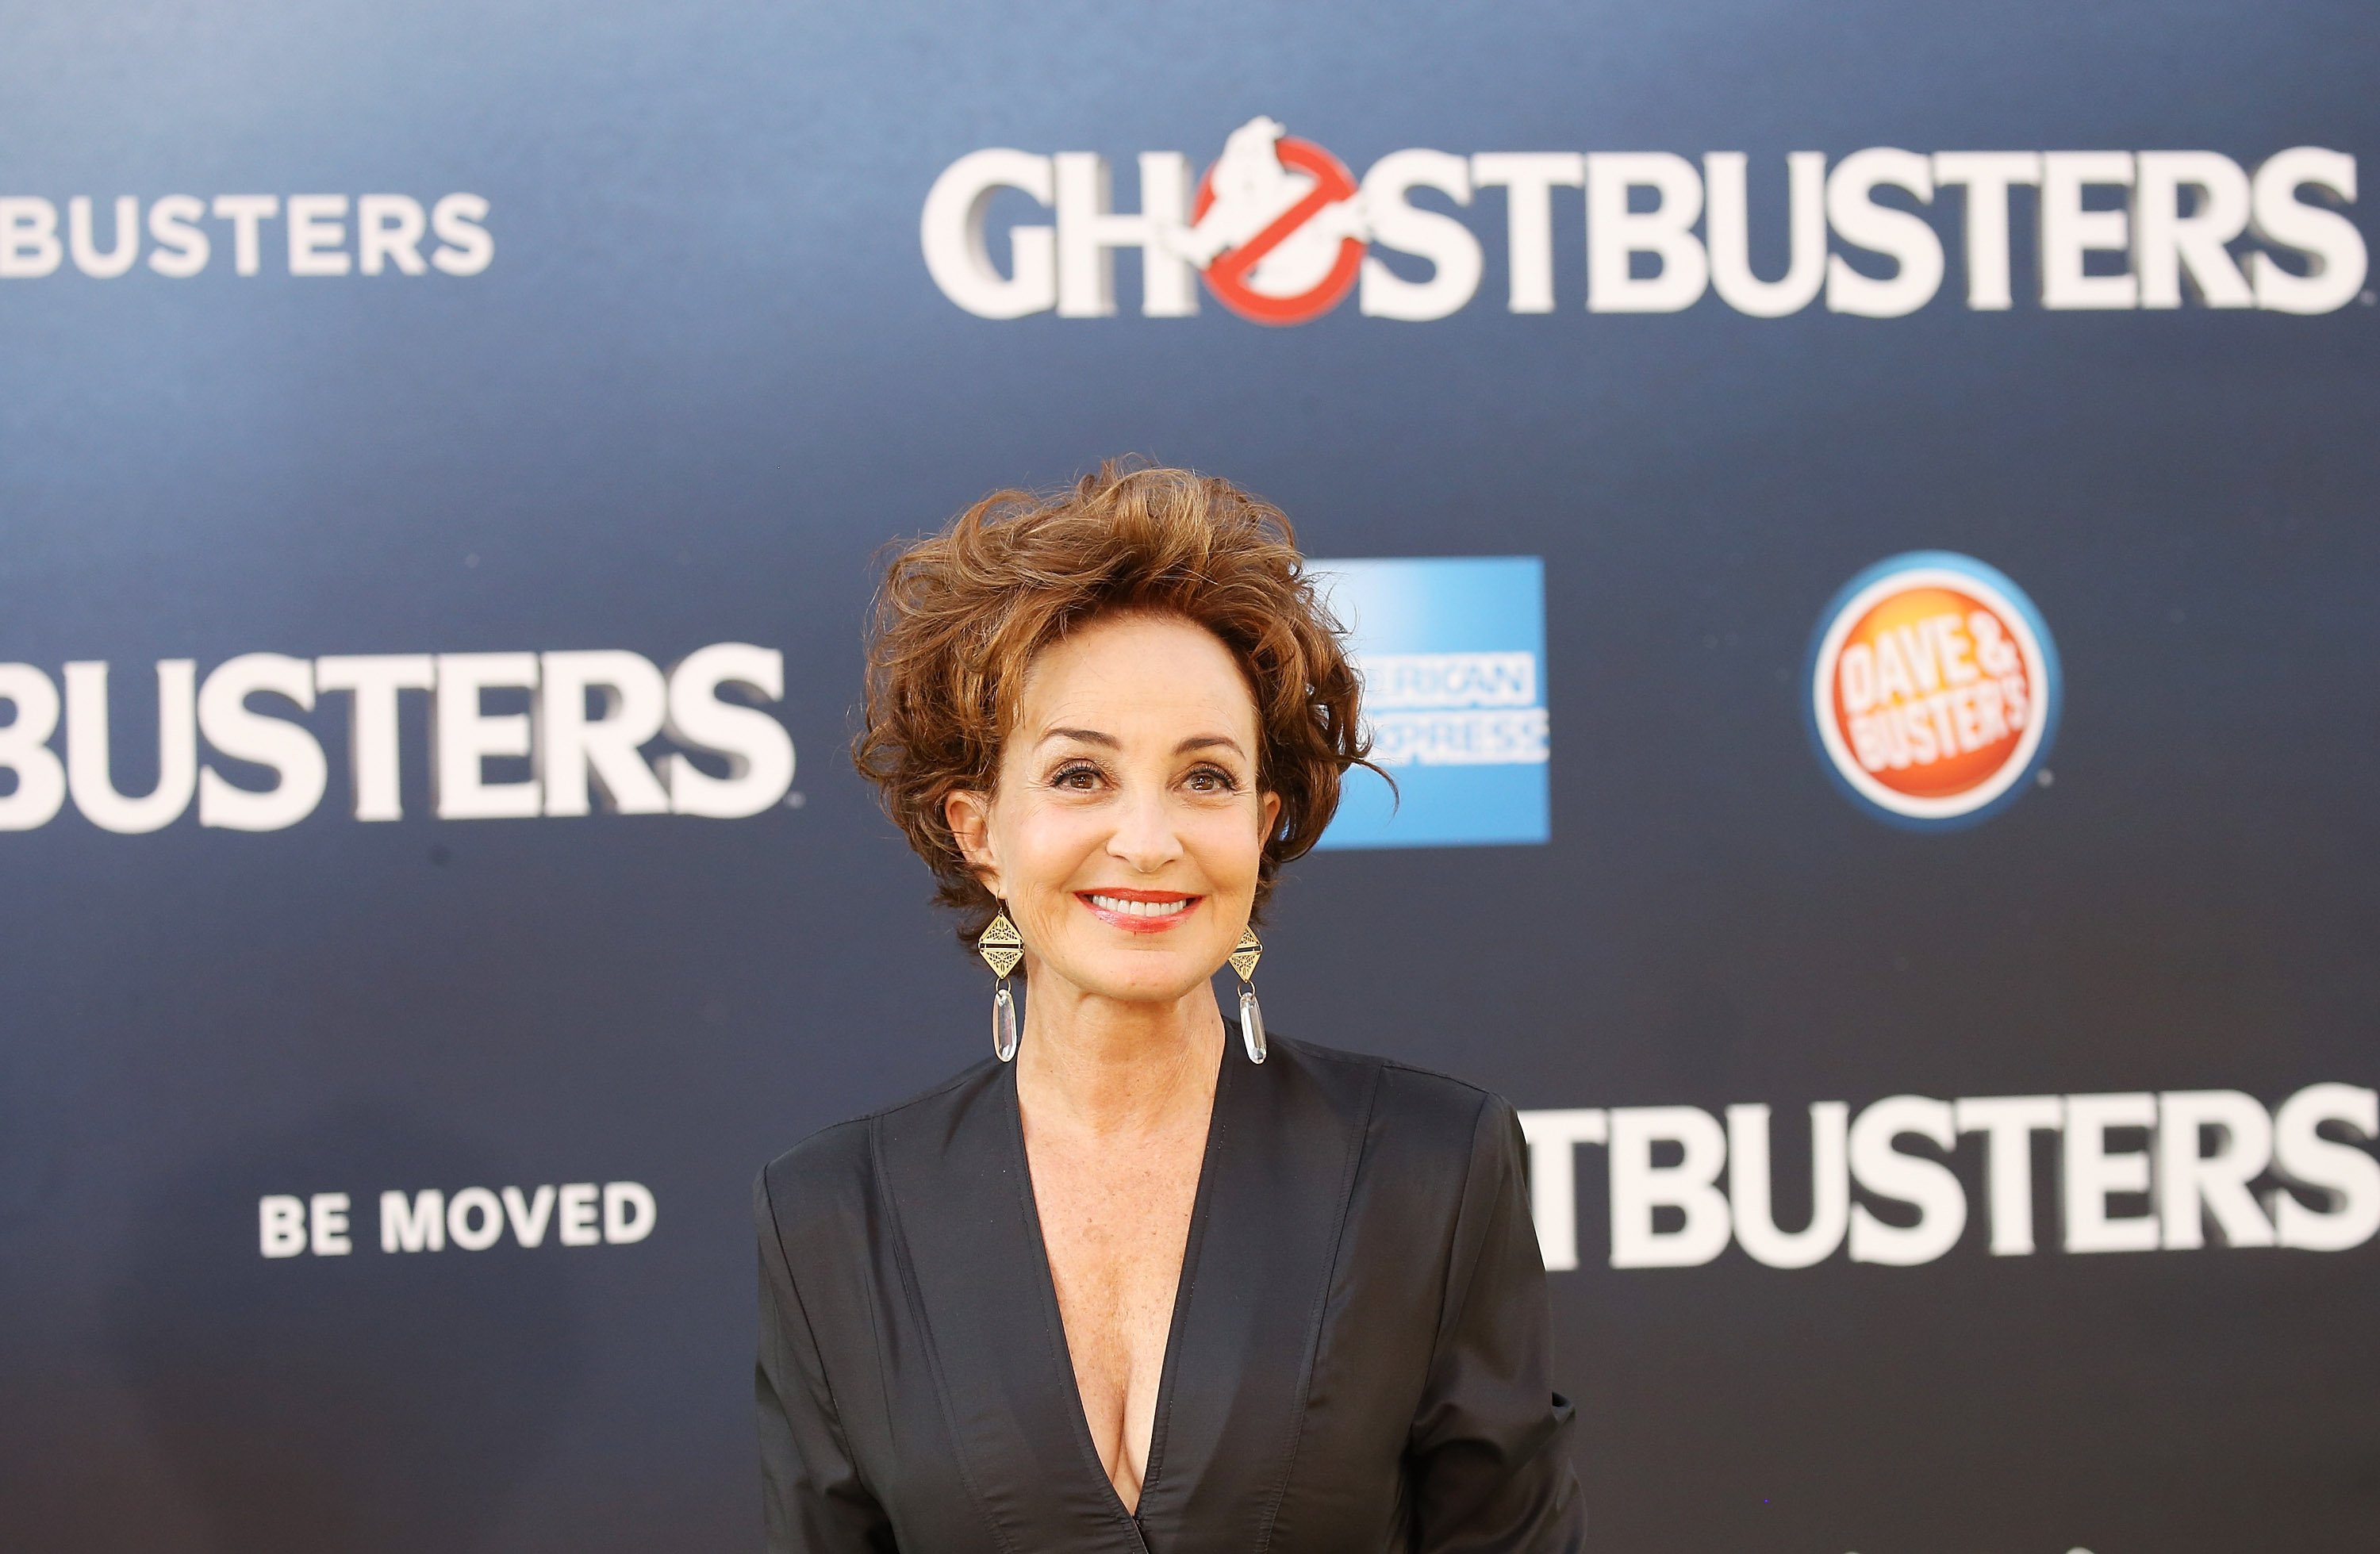 Annie Potts at the Premiere of "Ghostbusters" at TCL Chinese Theatre, Hollywood, CA, on July 9, 2016. | Source: Getty Images